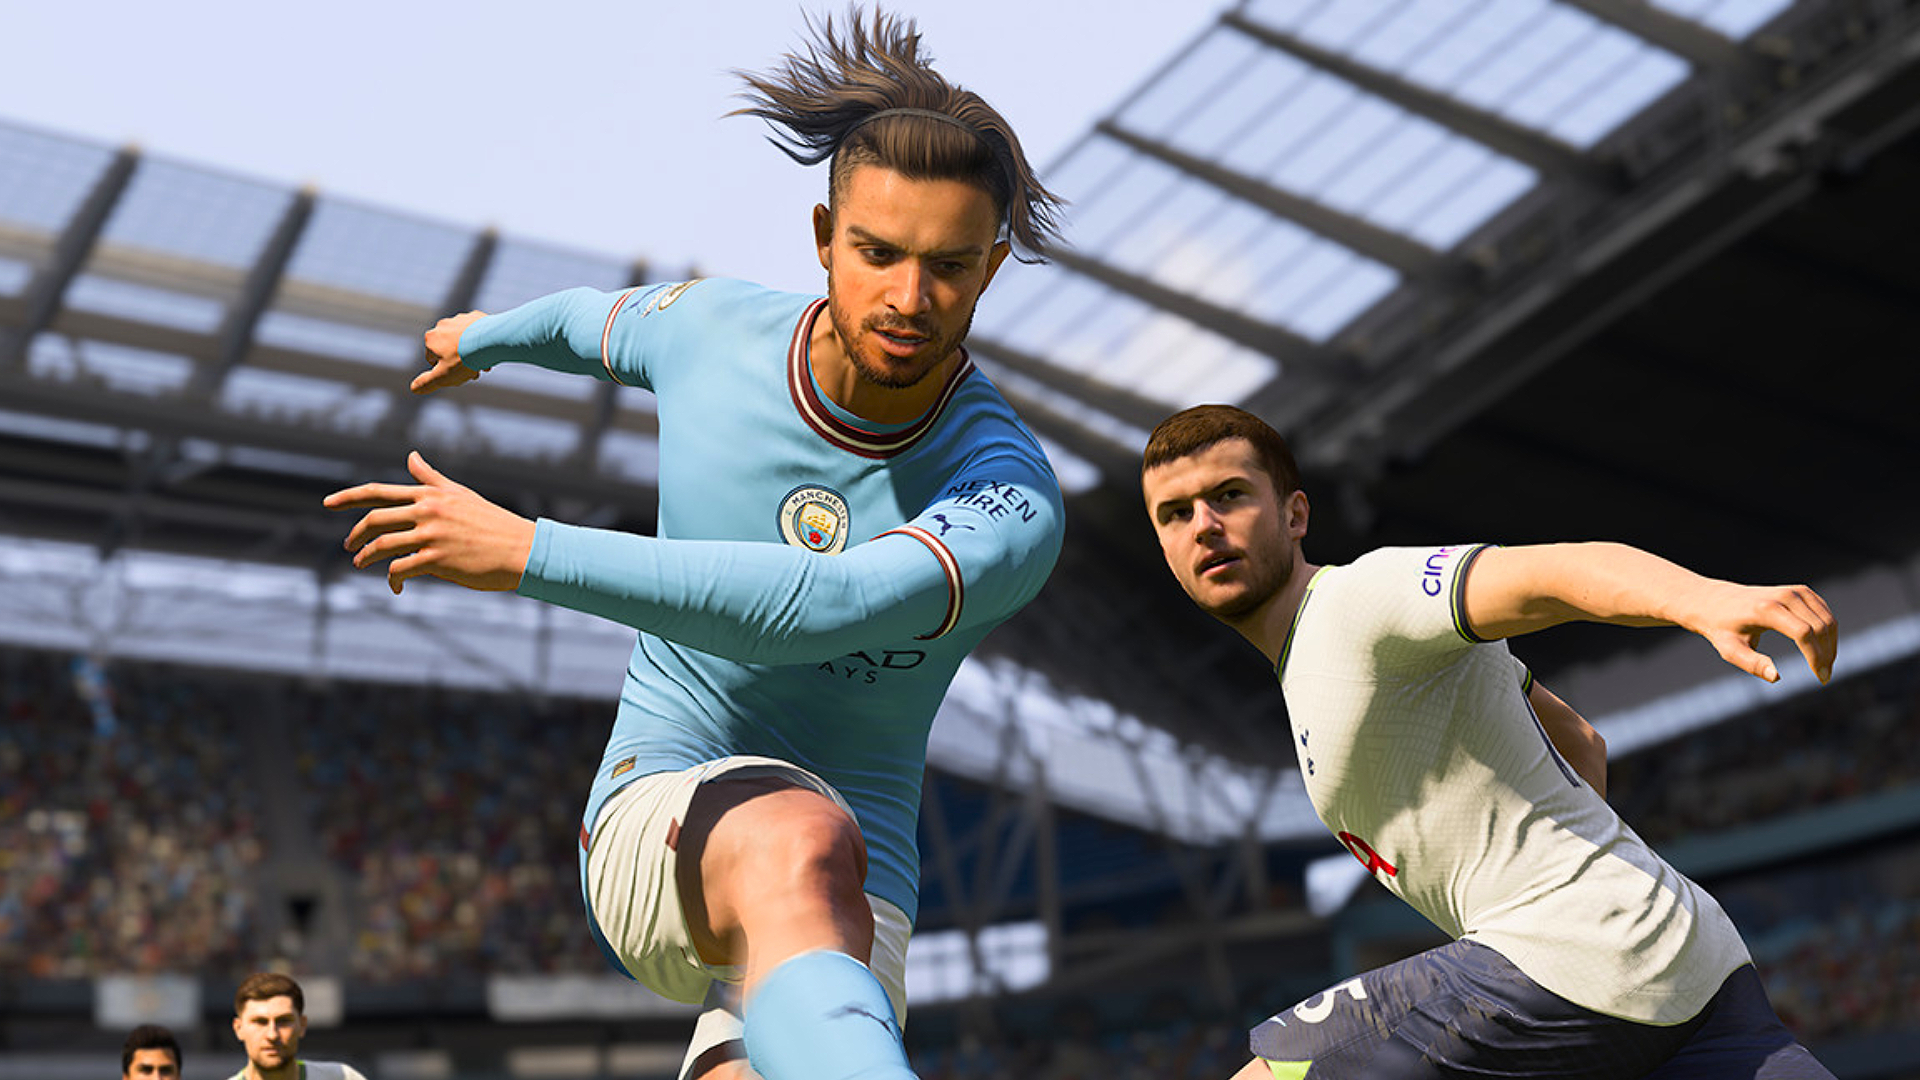 FIFA 23 on Steam Deck: Why it's near impossible to run the game on Valve's  handheld